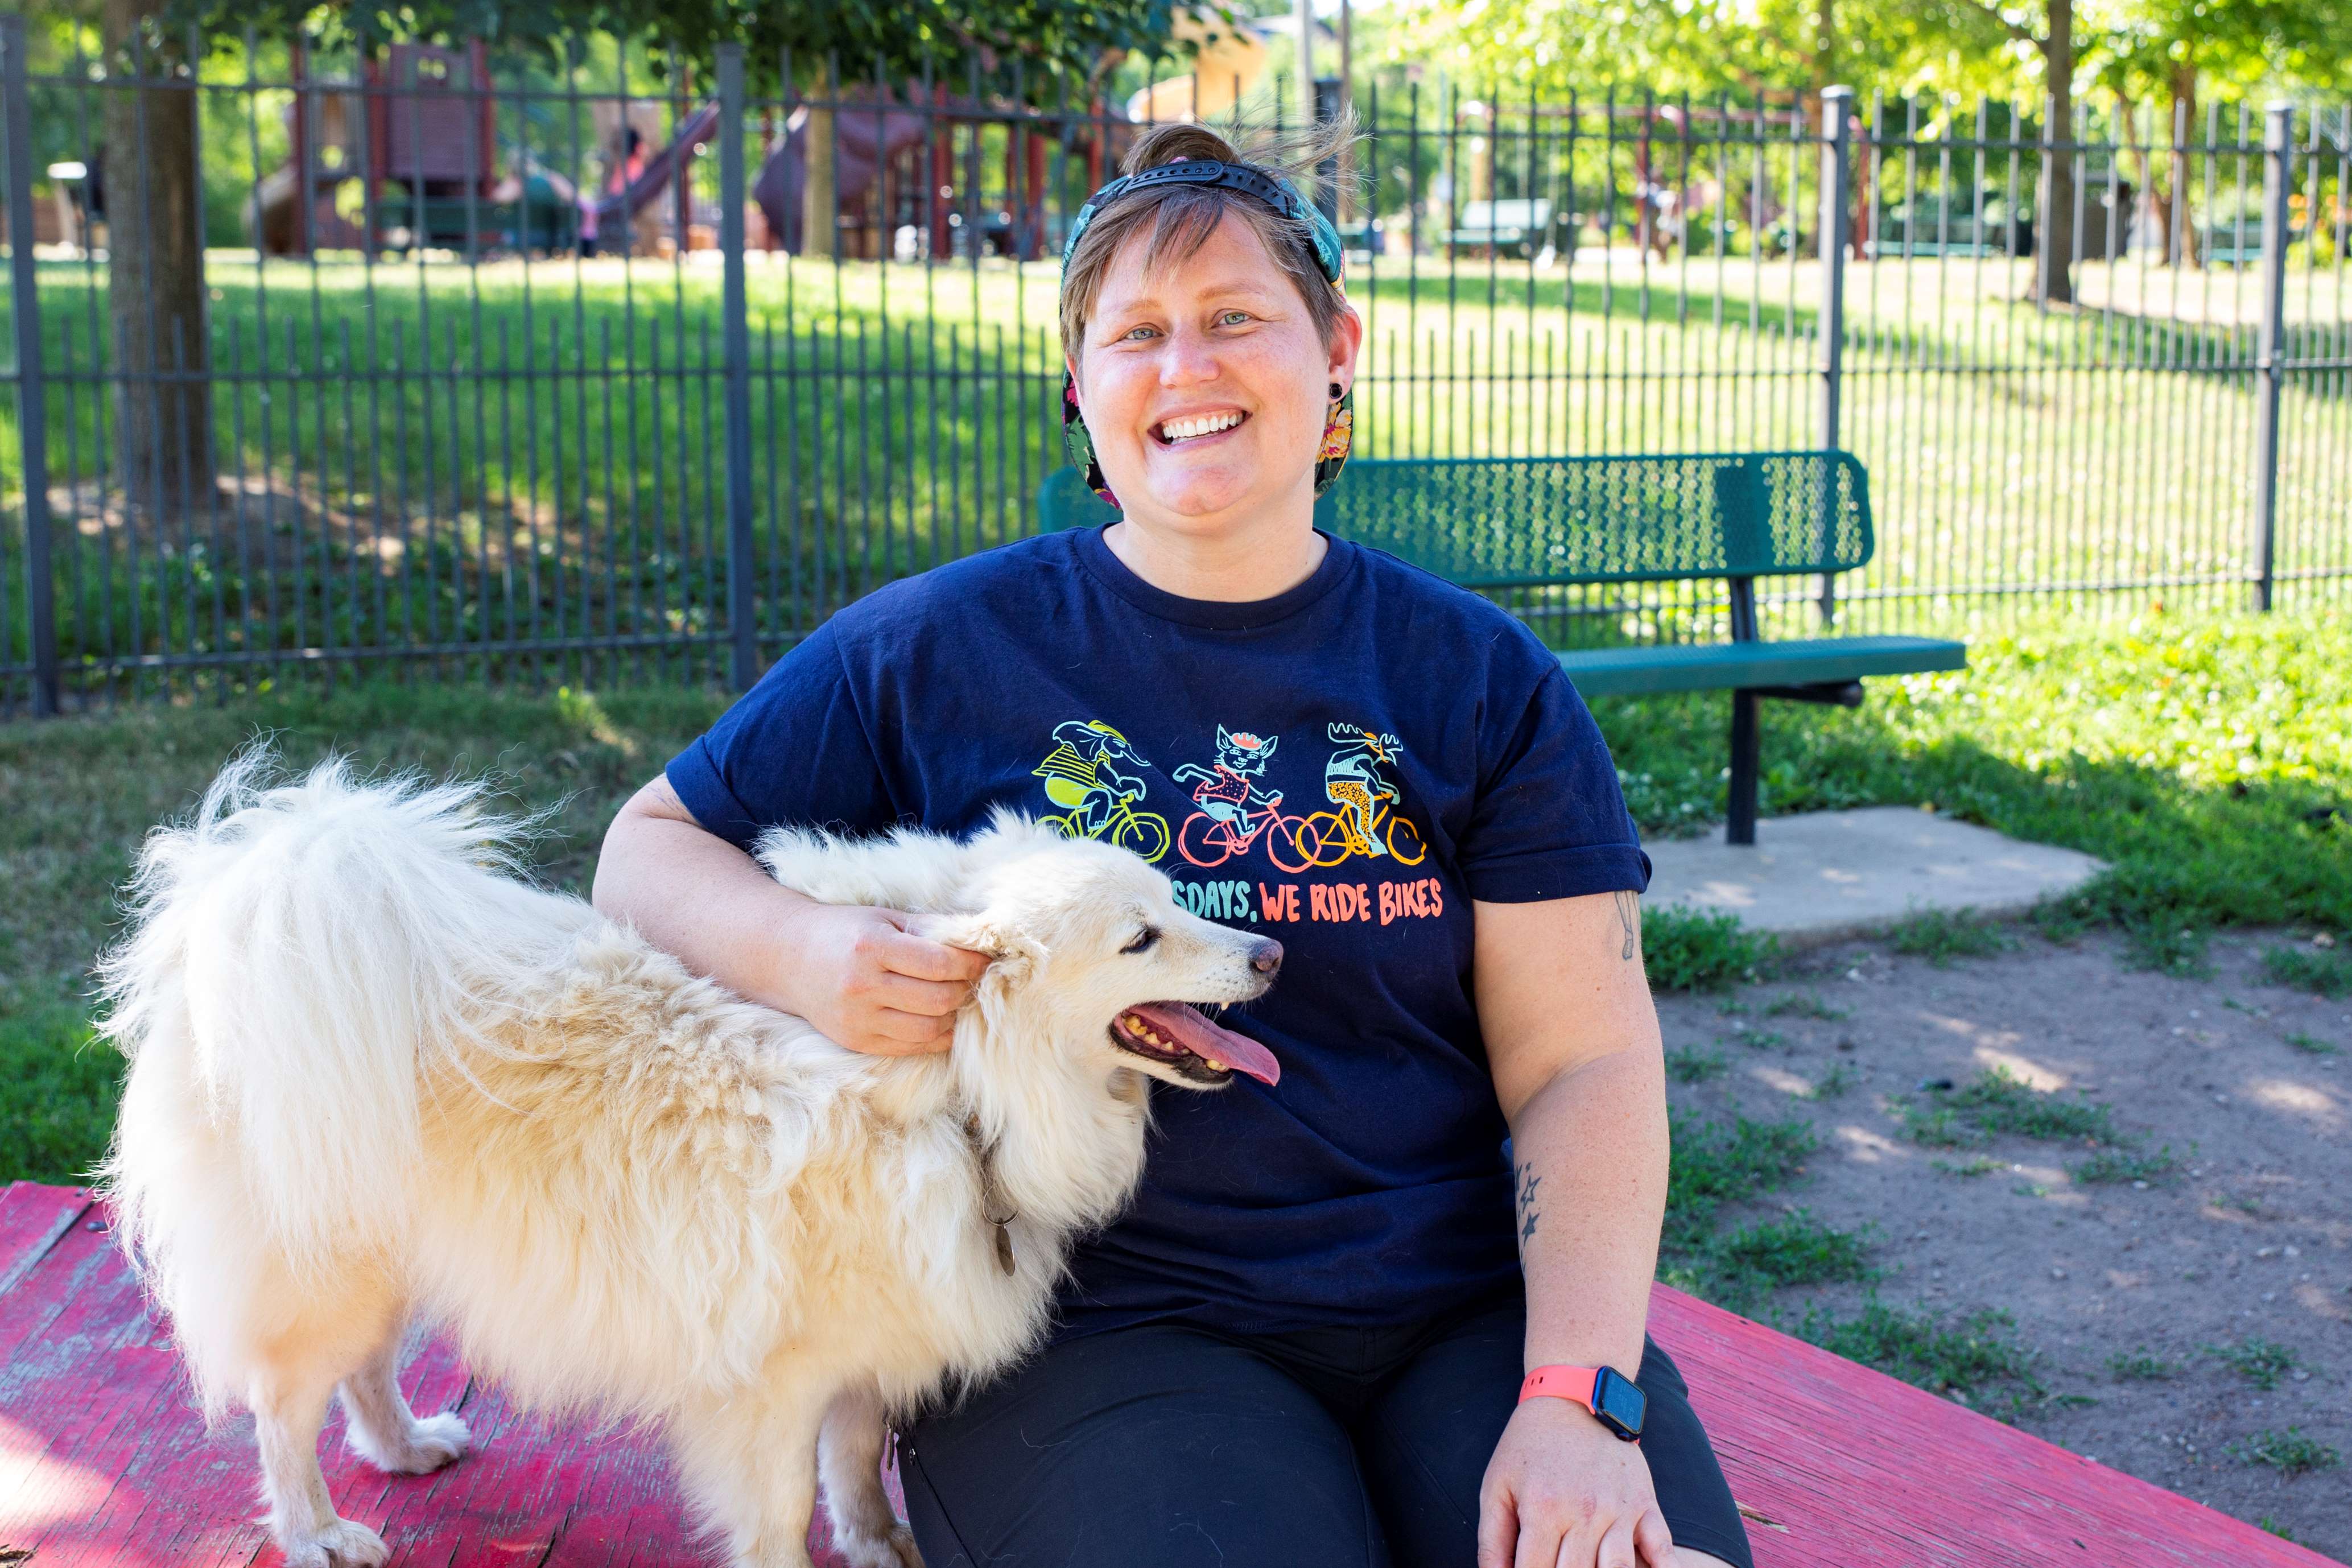 lady with a fluffy dog at a park